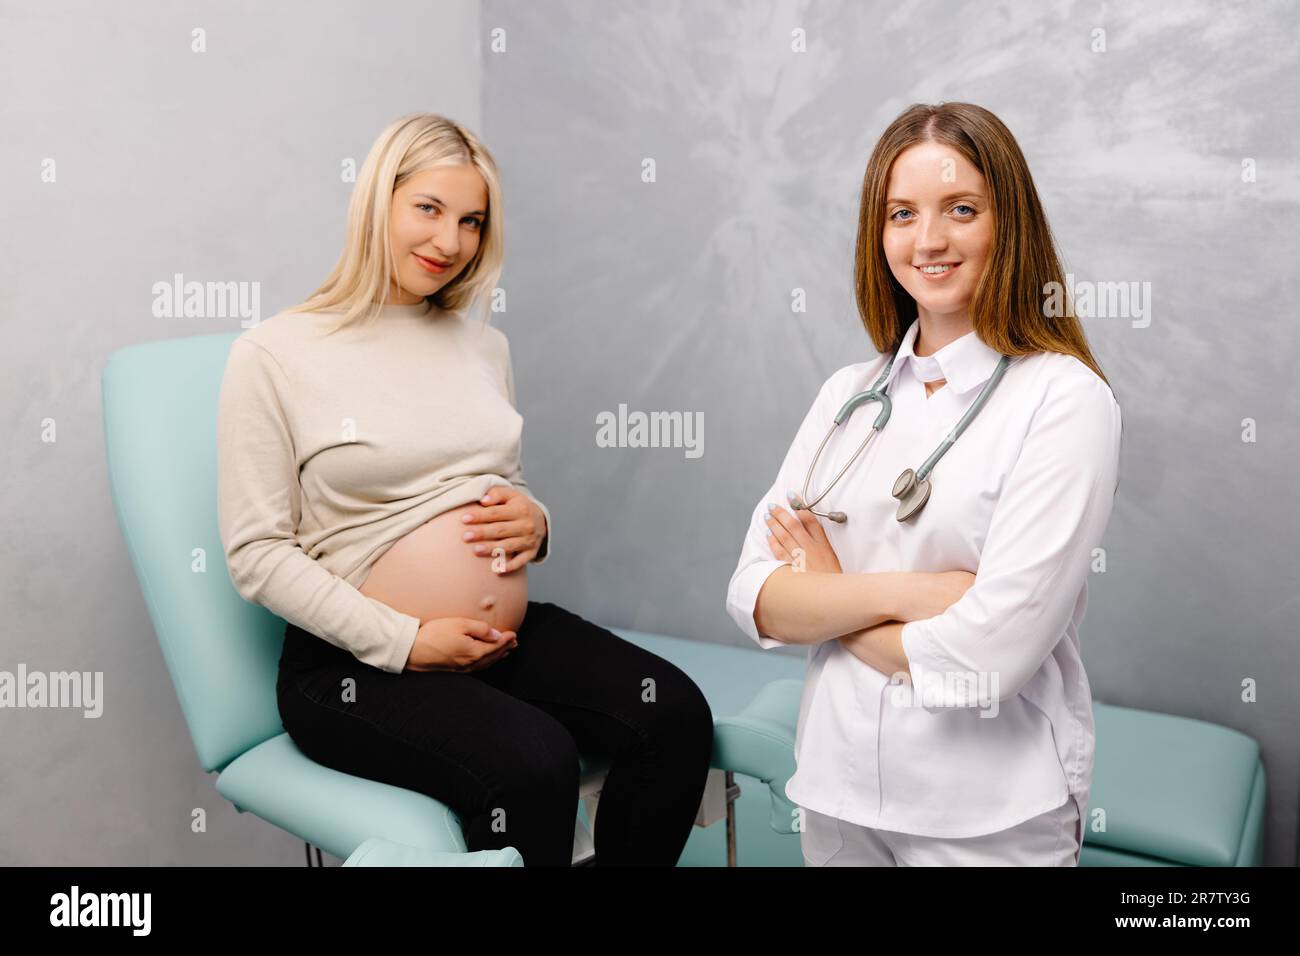 https://c8.alamy.com/comp/2R7TY3G/gynecologist-preparing-for-an-examination-procedure-for-a-pregnant-woman-sitting-on-a-gynecological-chair-in-the-office-and-smiling-2R7TY3G.jpg